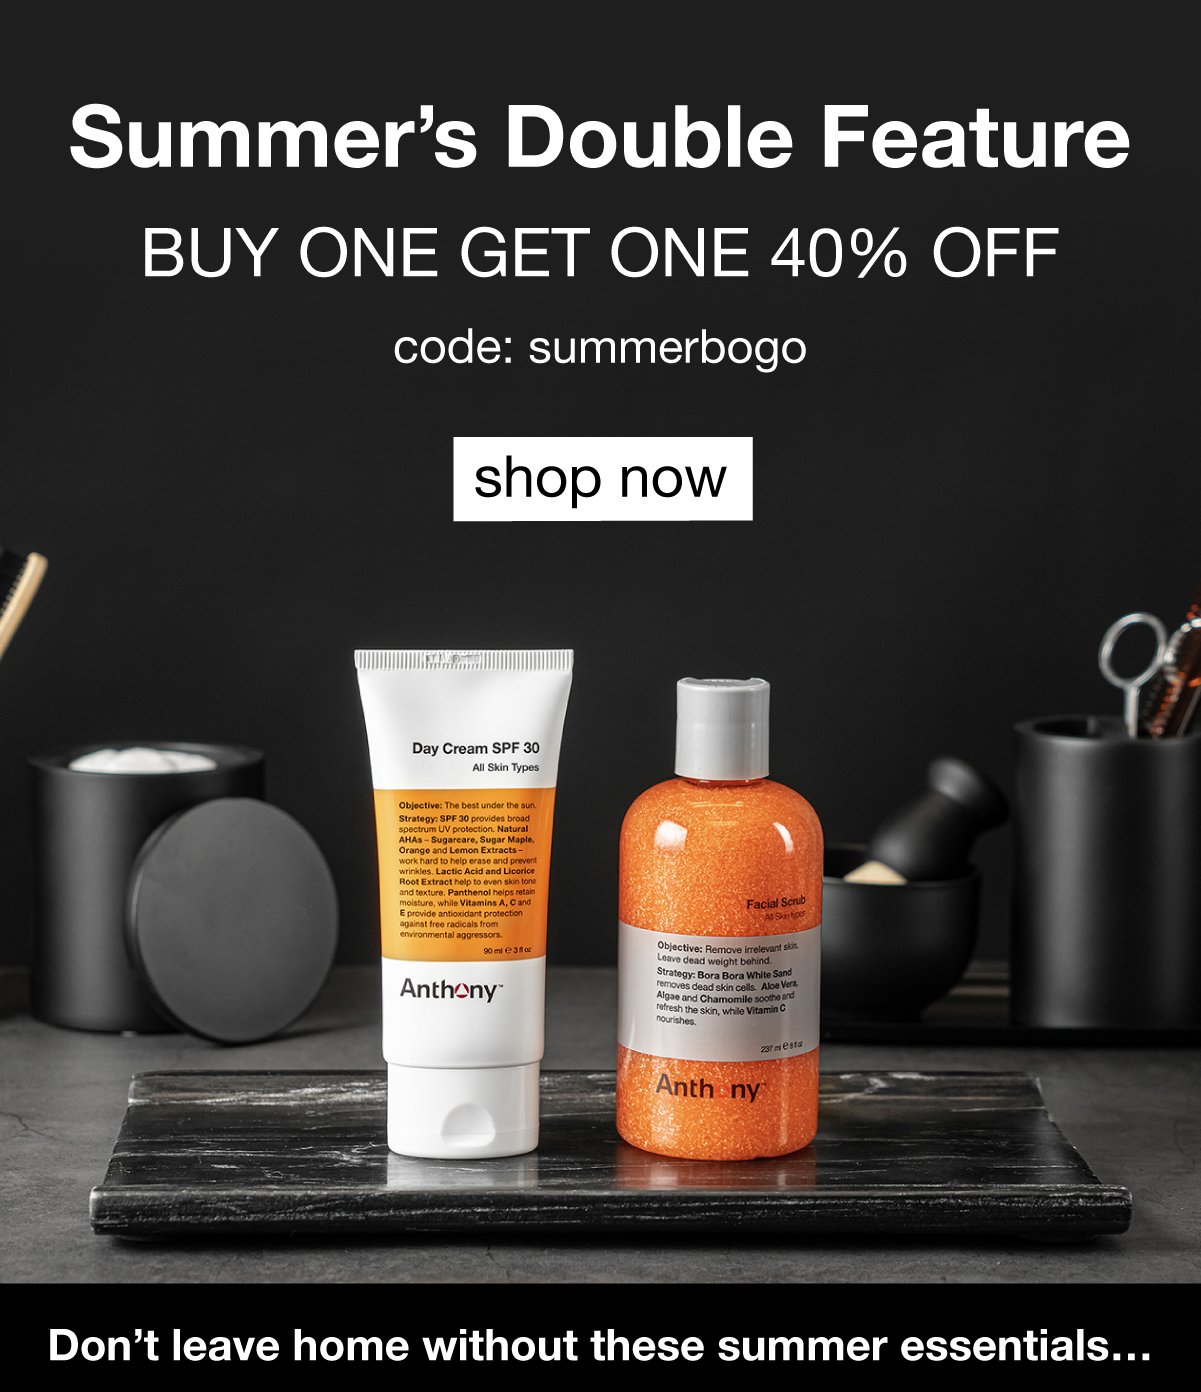 Summer's Double Feather- Buy One Get One 40% off with code SUMMERBOGO